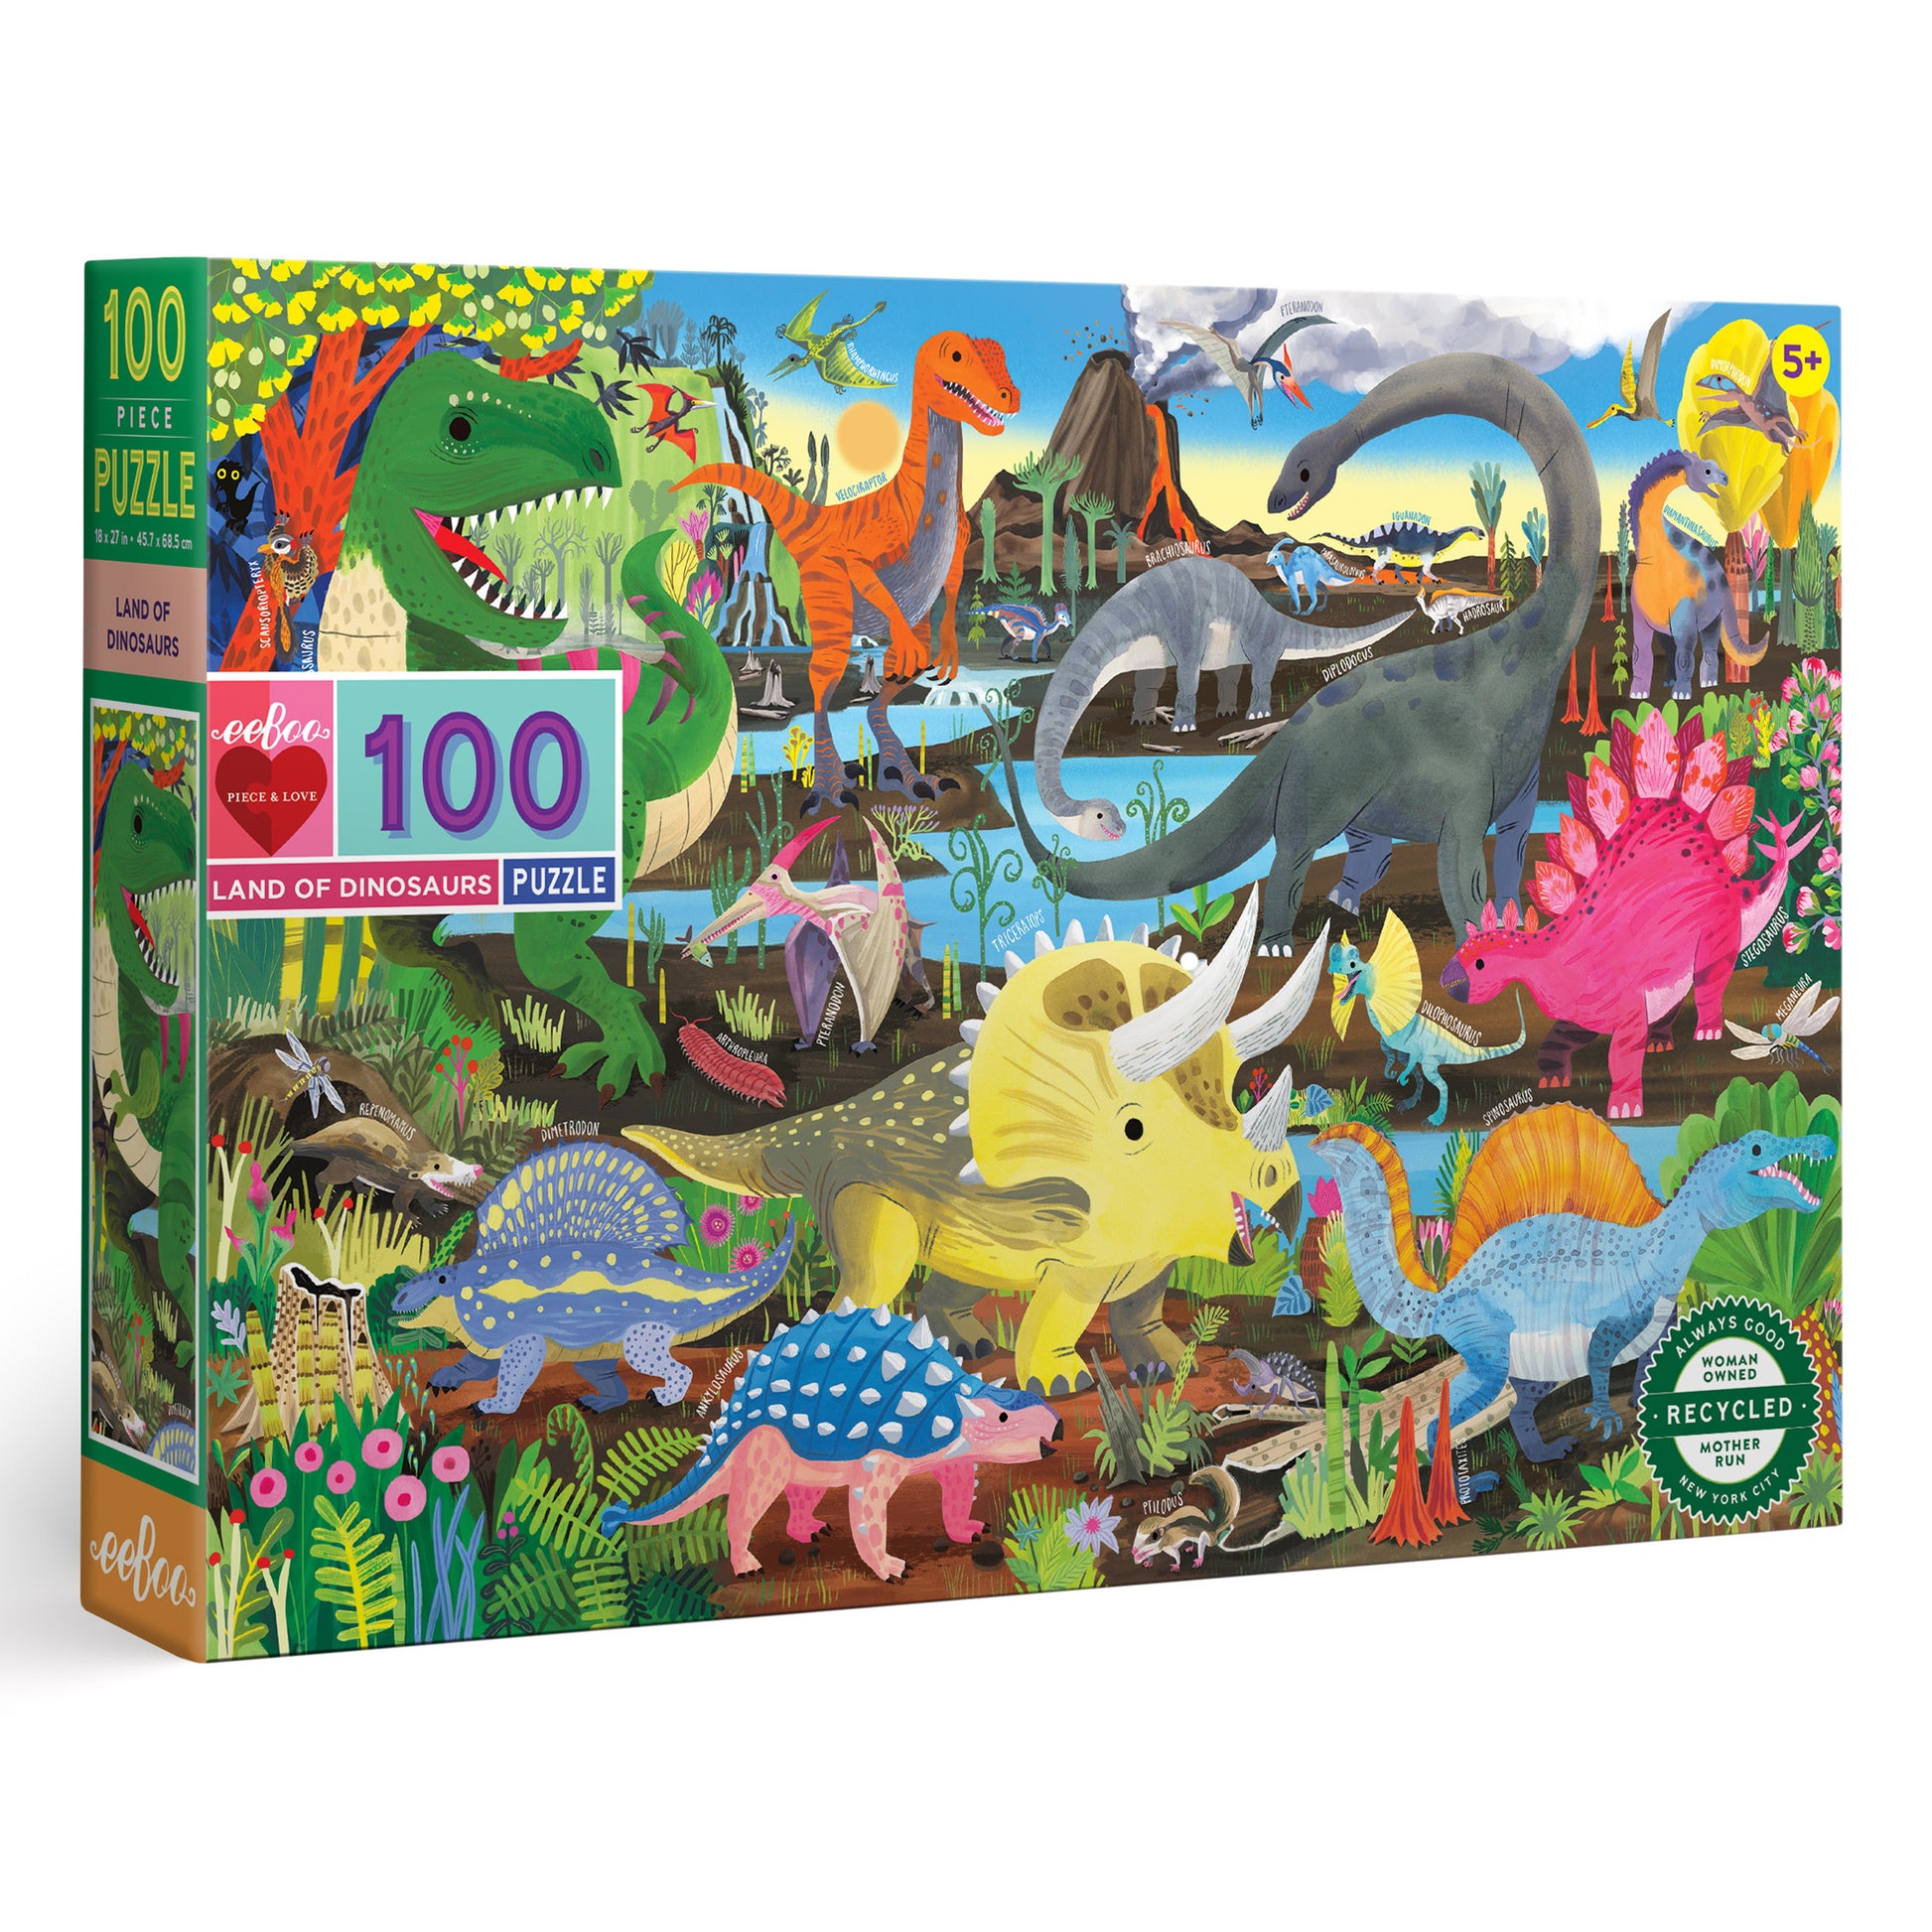 Land of Dinosaurs 100 Piece Jigsaw Puzzle eeBoo Cute Gifts for Kids 5+